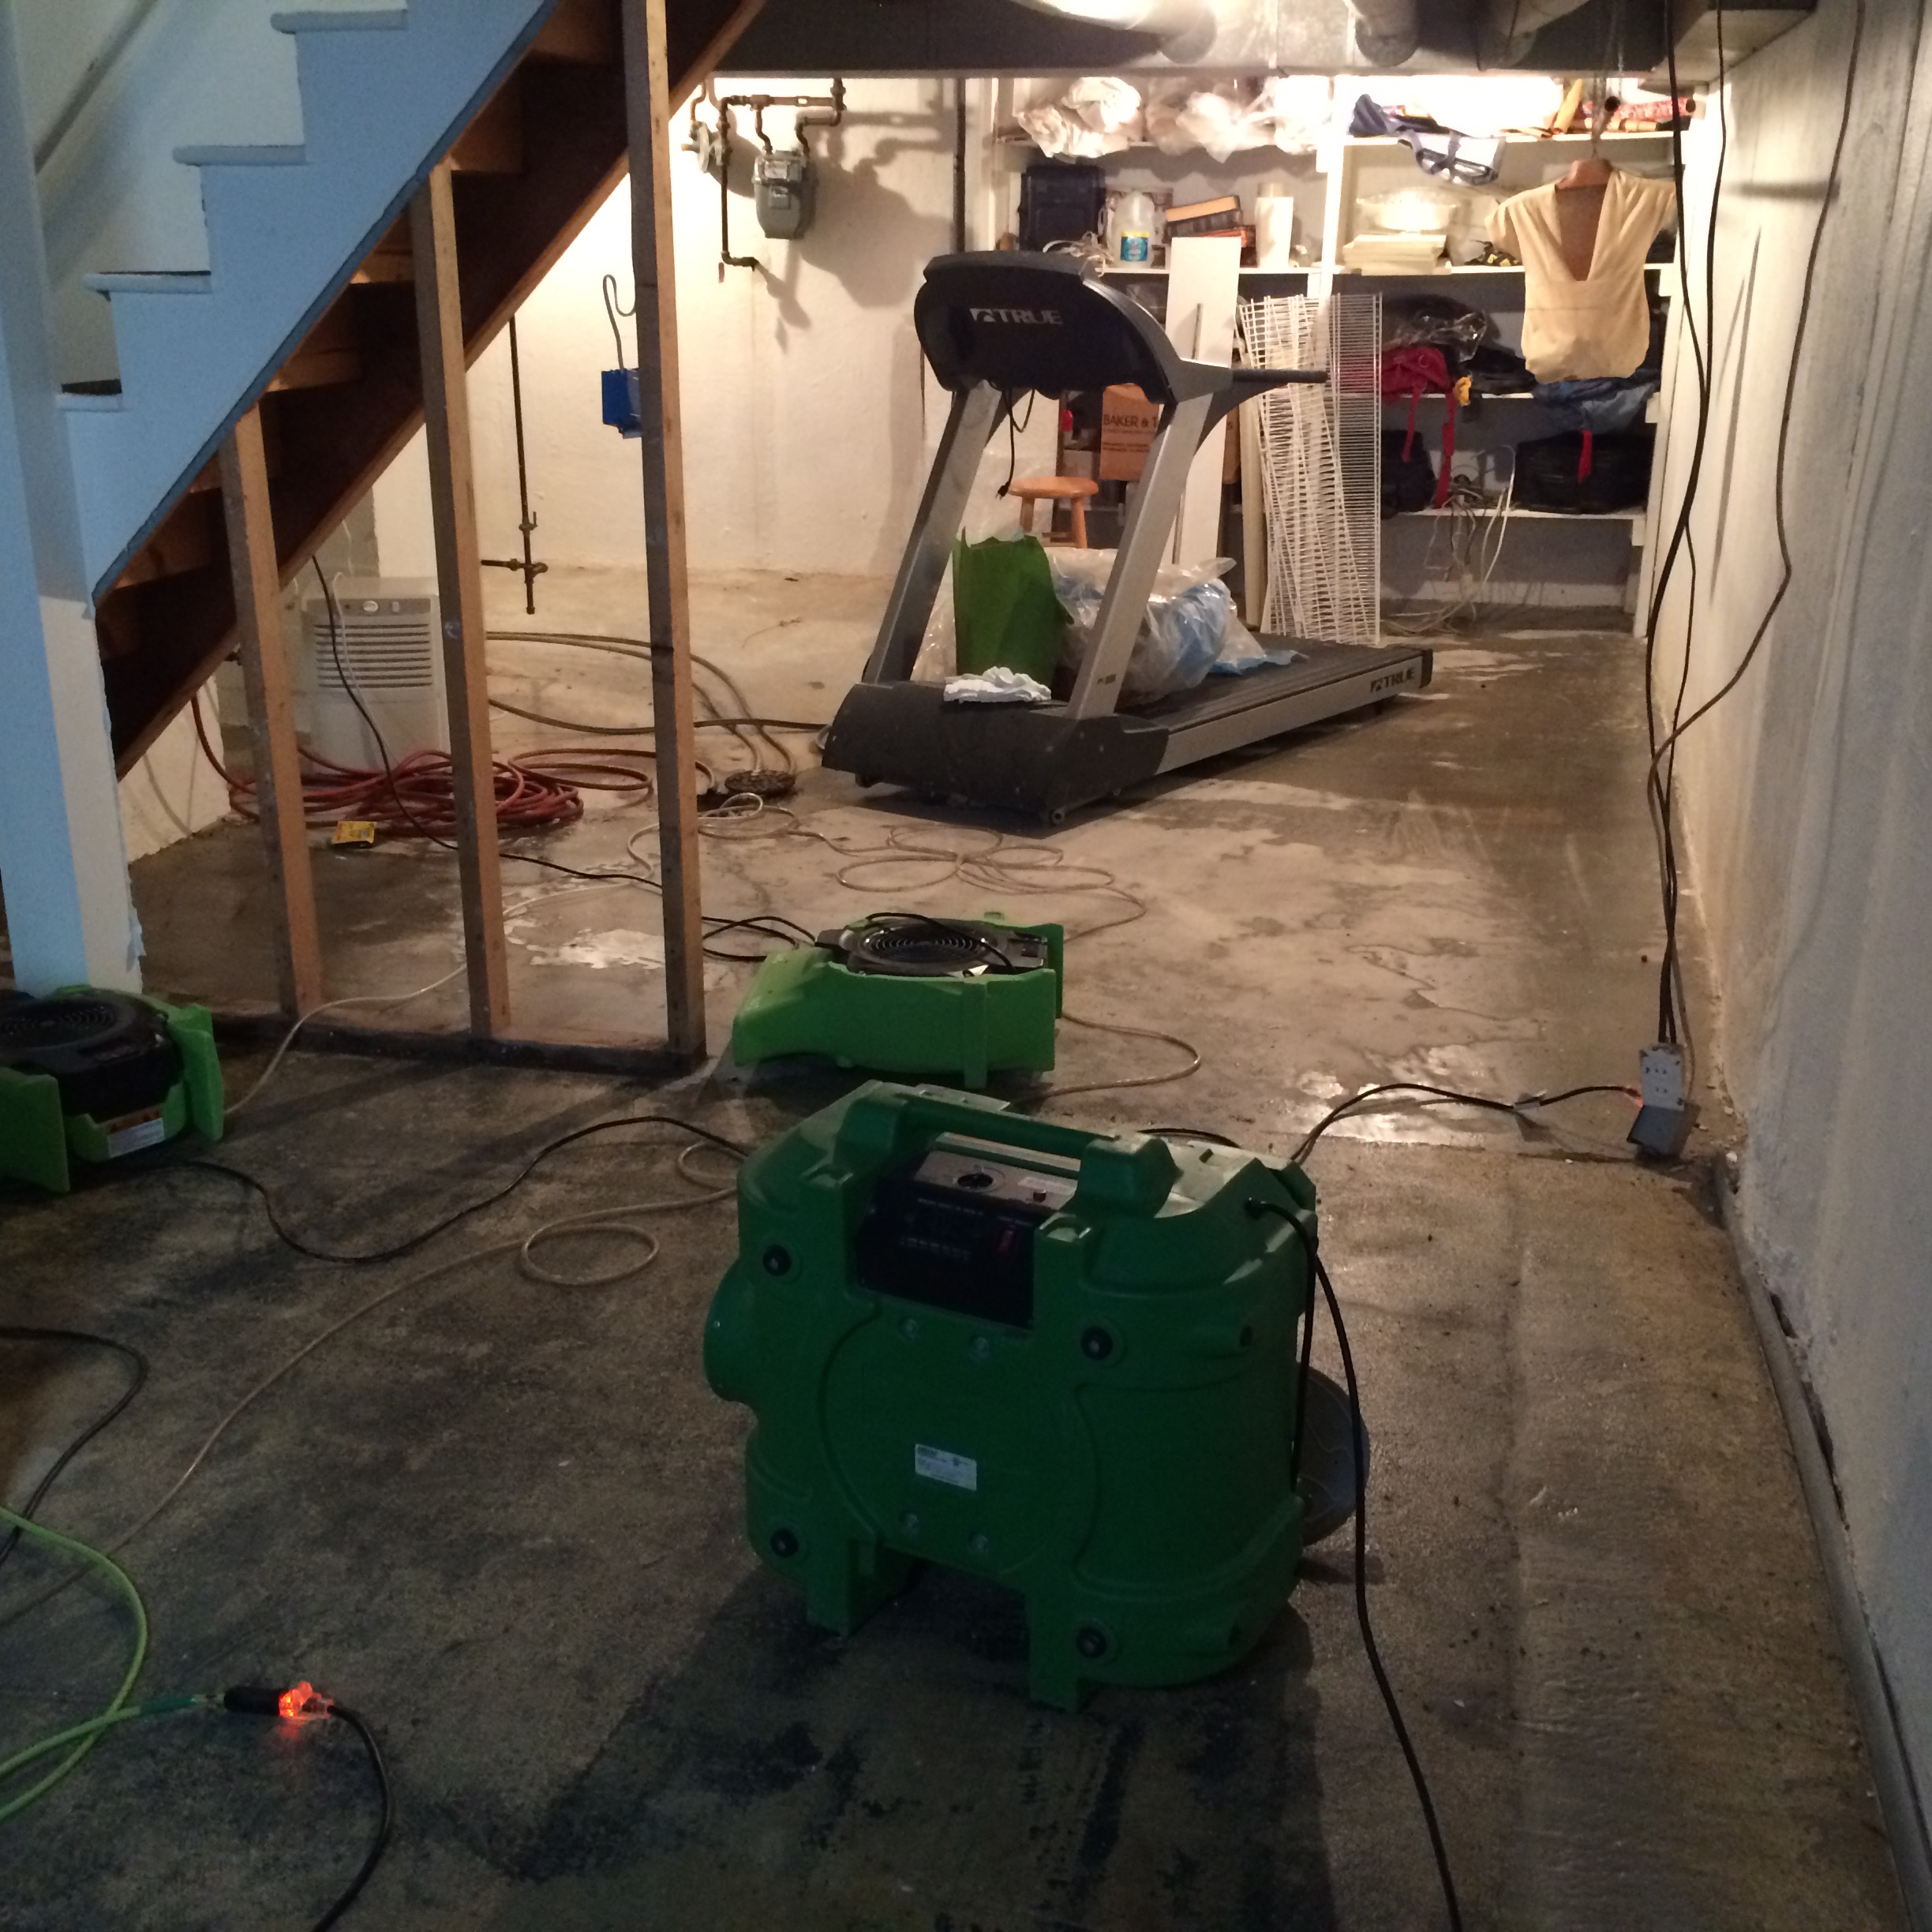 SERVPRO of Northwest St. Louis County has the best team and equipment to properly restore your home or business back to pre-loss conditions after a water loss.